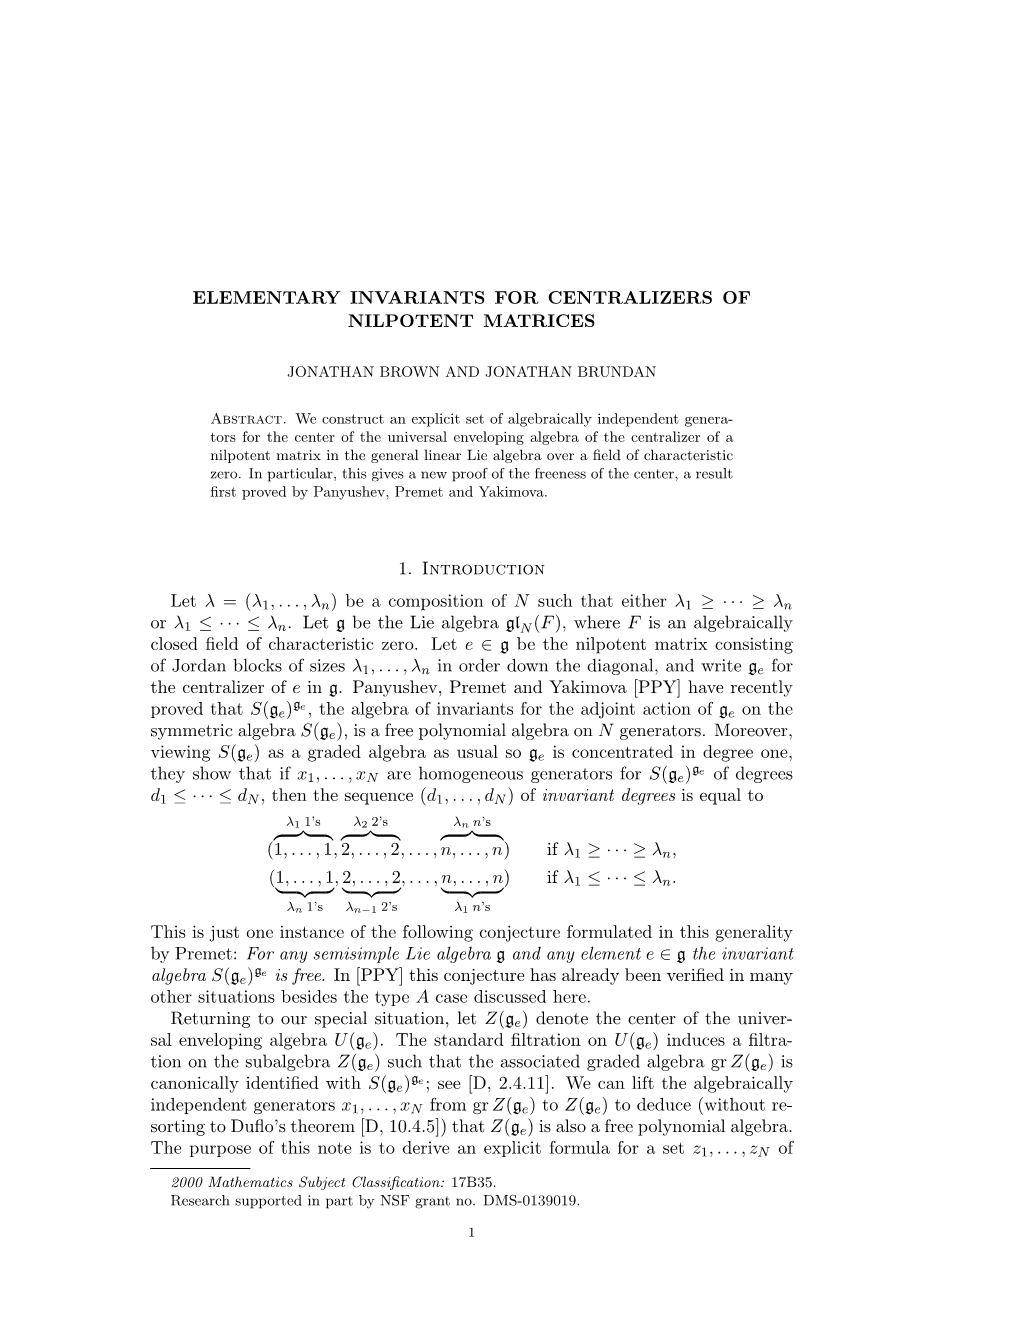 Elementary Invariants for Centralizers of Nilpotent Matrices